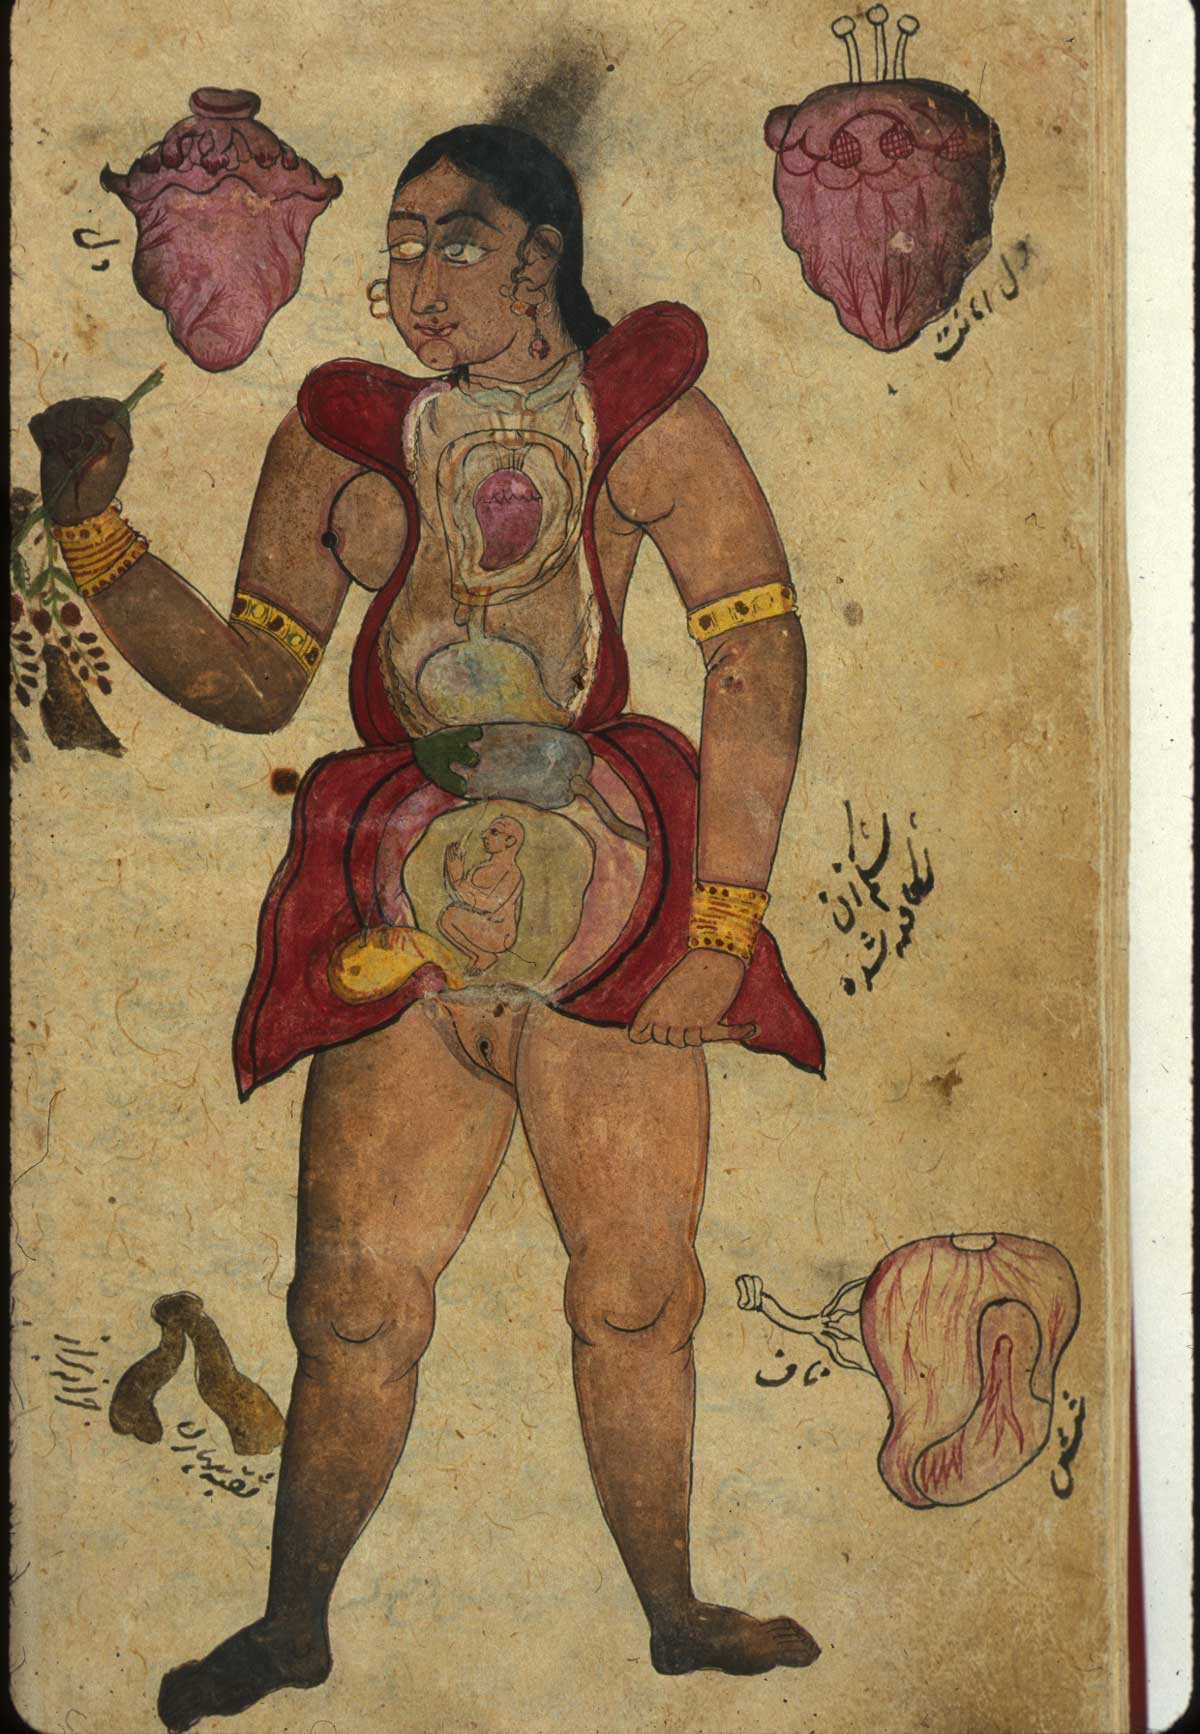 Illustrations, in ink and opaque watercolors, of a pregnant woman with abdomen and chest opened to reveal the internal organs and fetus; surrounding the figure are drawings of [at the top] two hearts, [lower right] the lungs, and something unidentifed in the lower left (labeled the opening of the vagina). Undated and unsigned, probably 18th century, India, from NLM MS P 20.